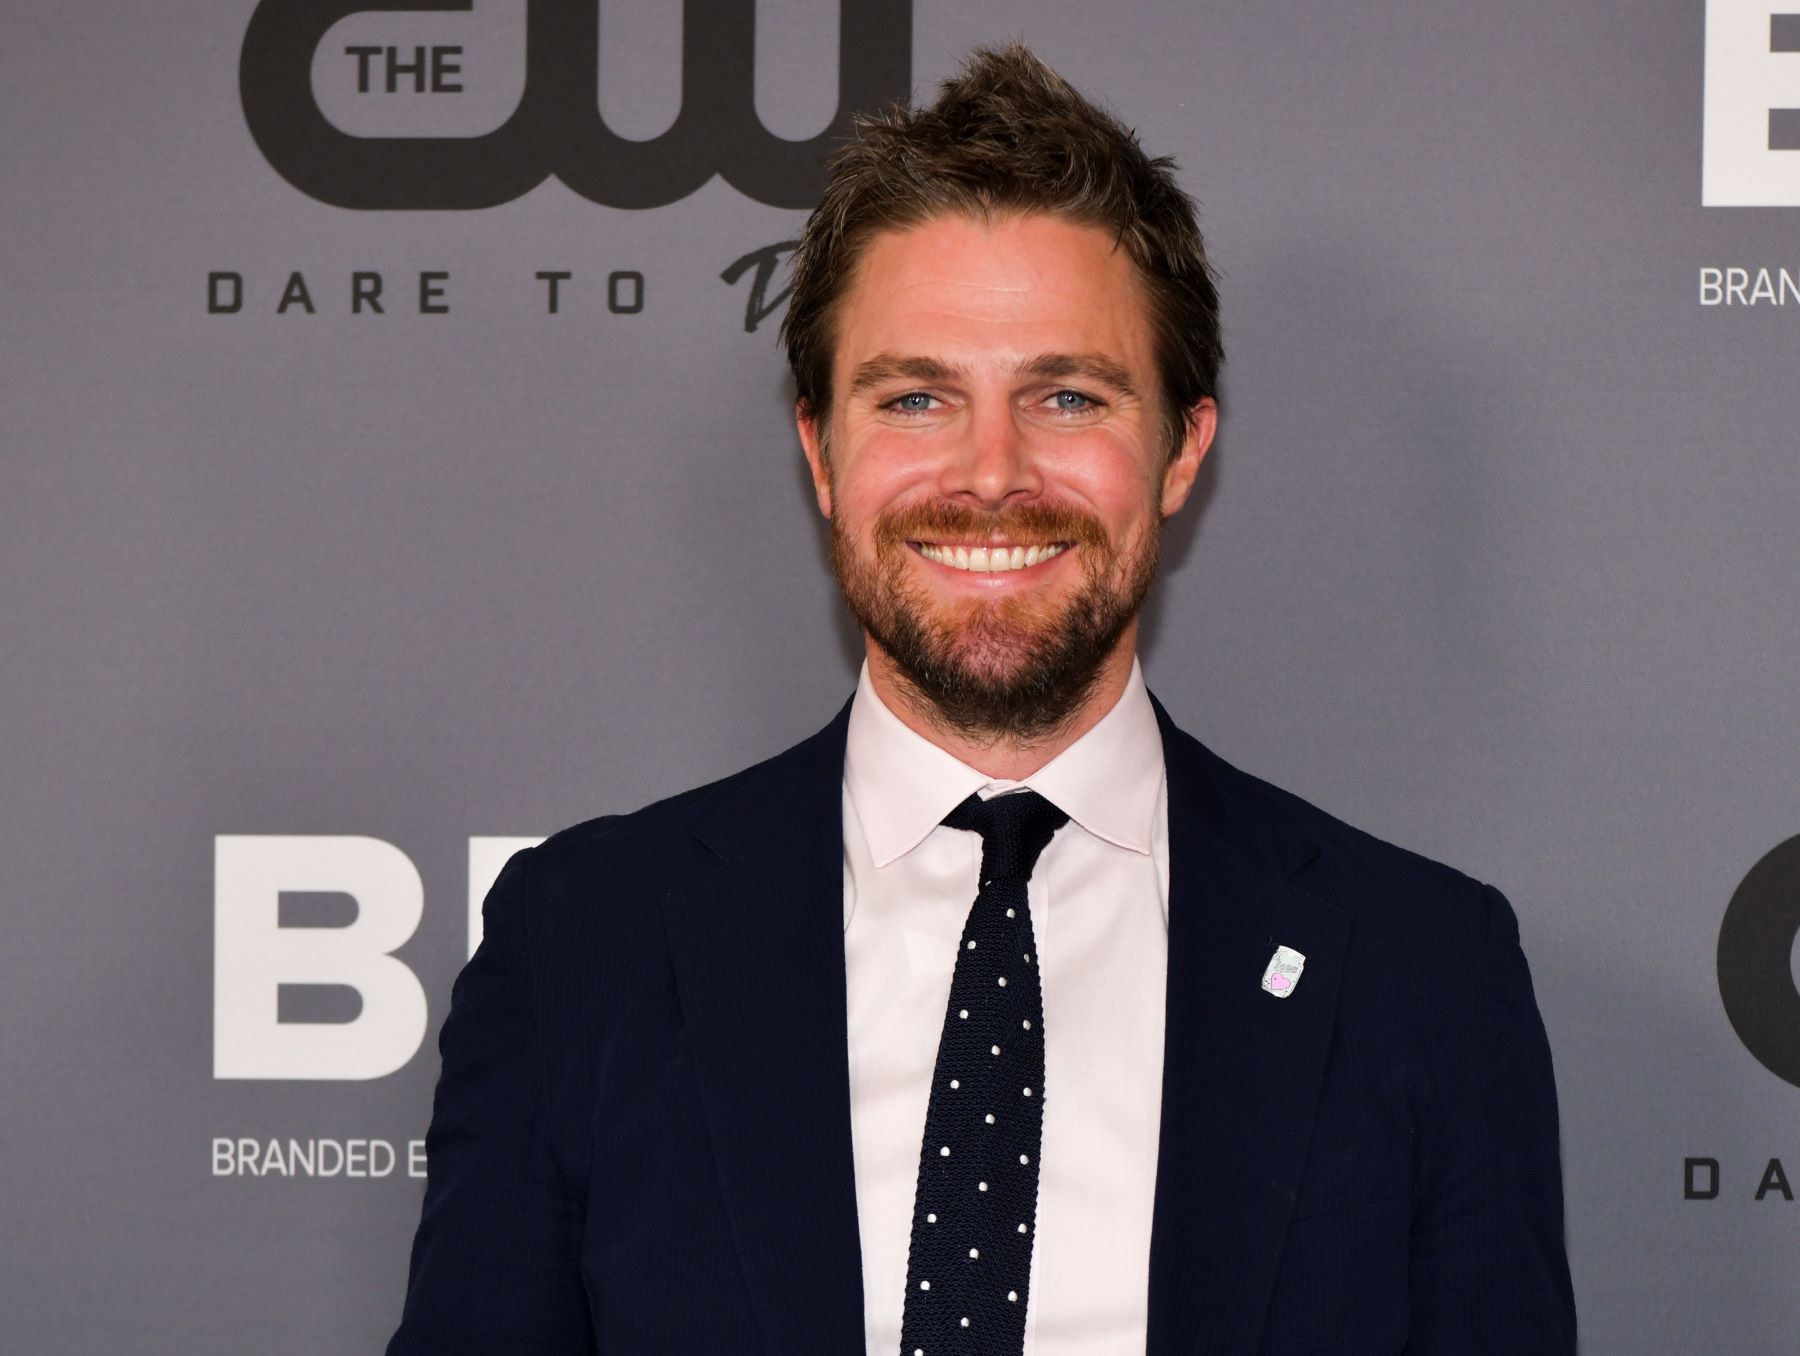 Stephen Amell Gets ‘Arrow’ Tattoo as a ‘Gentle Reminder’